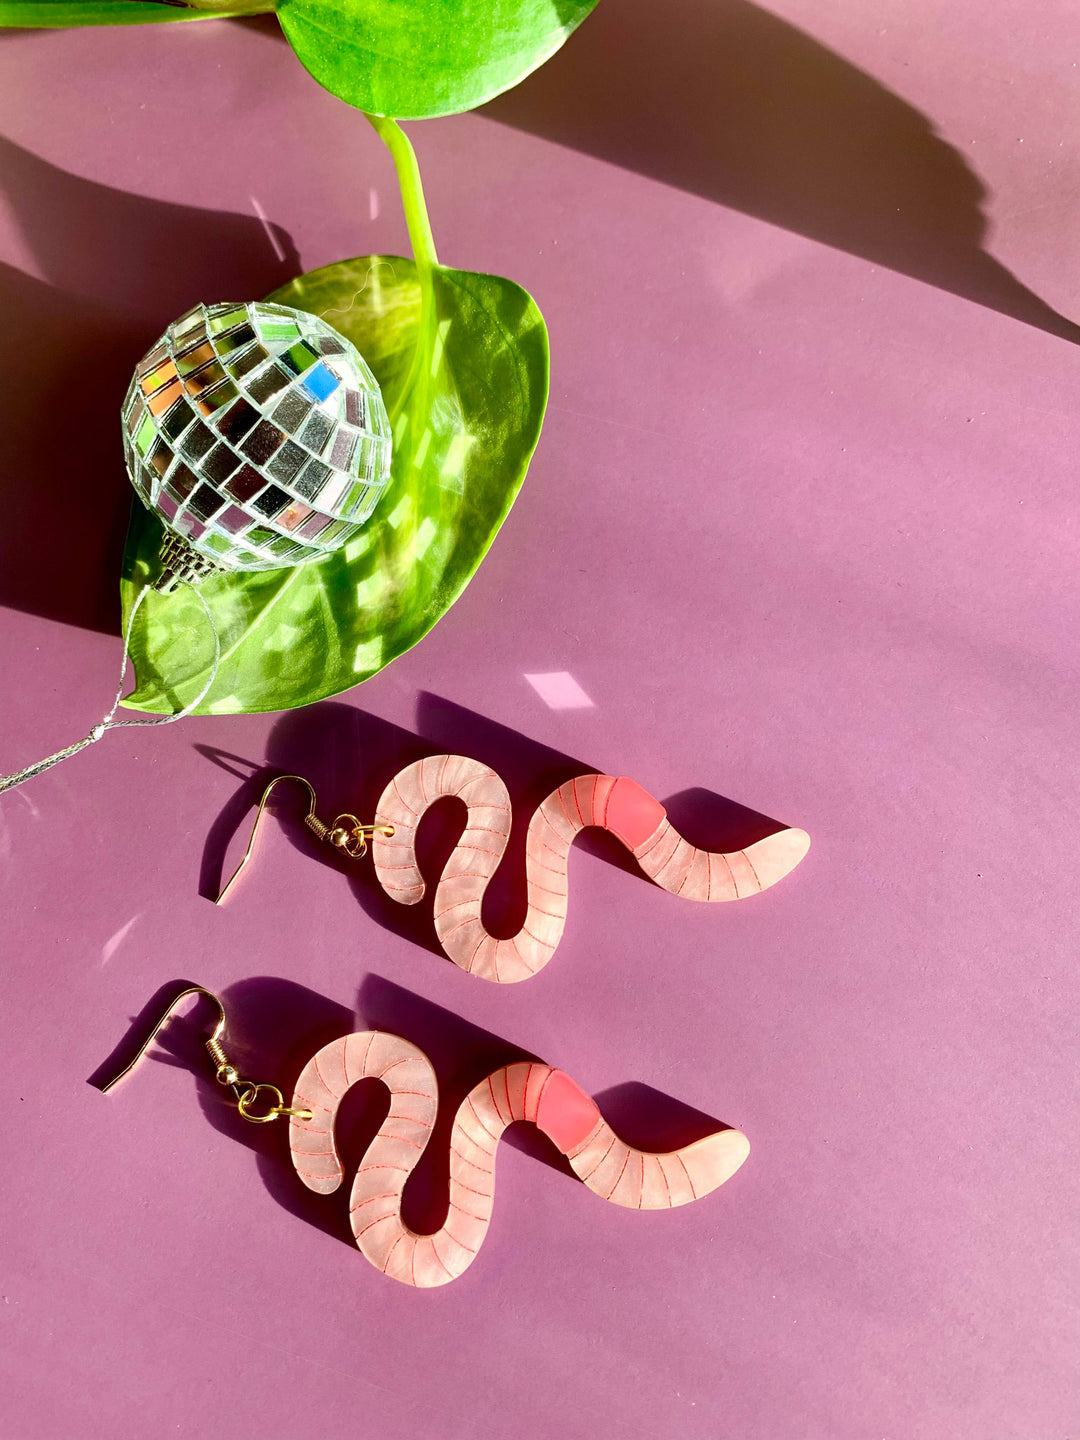 Wiggly Worms Acrylic Statement Earrings